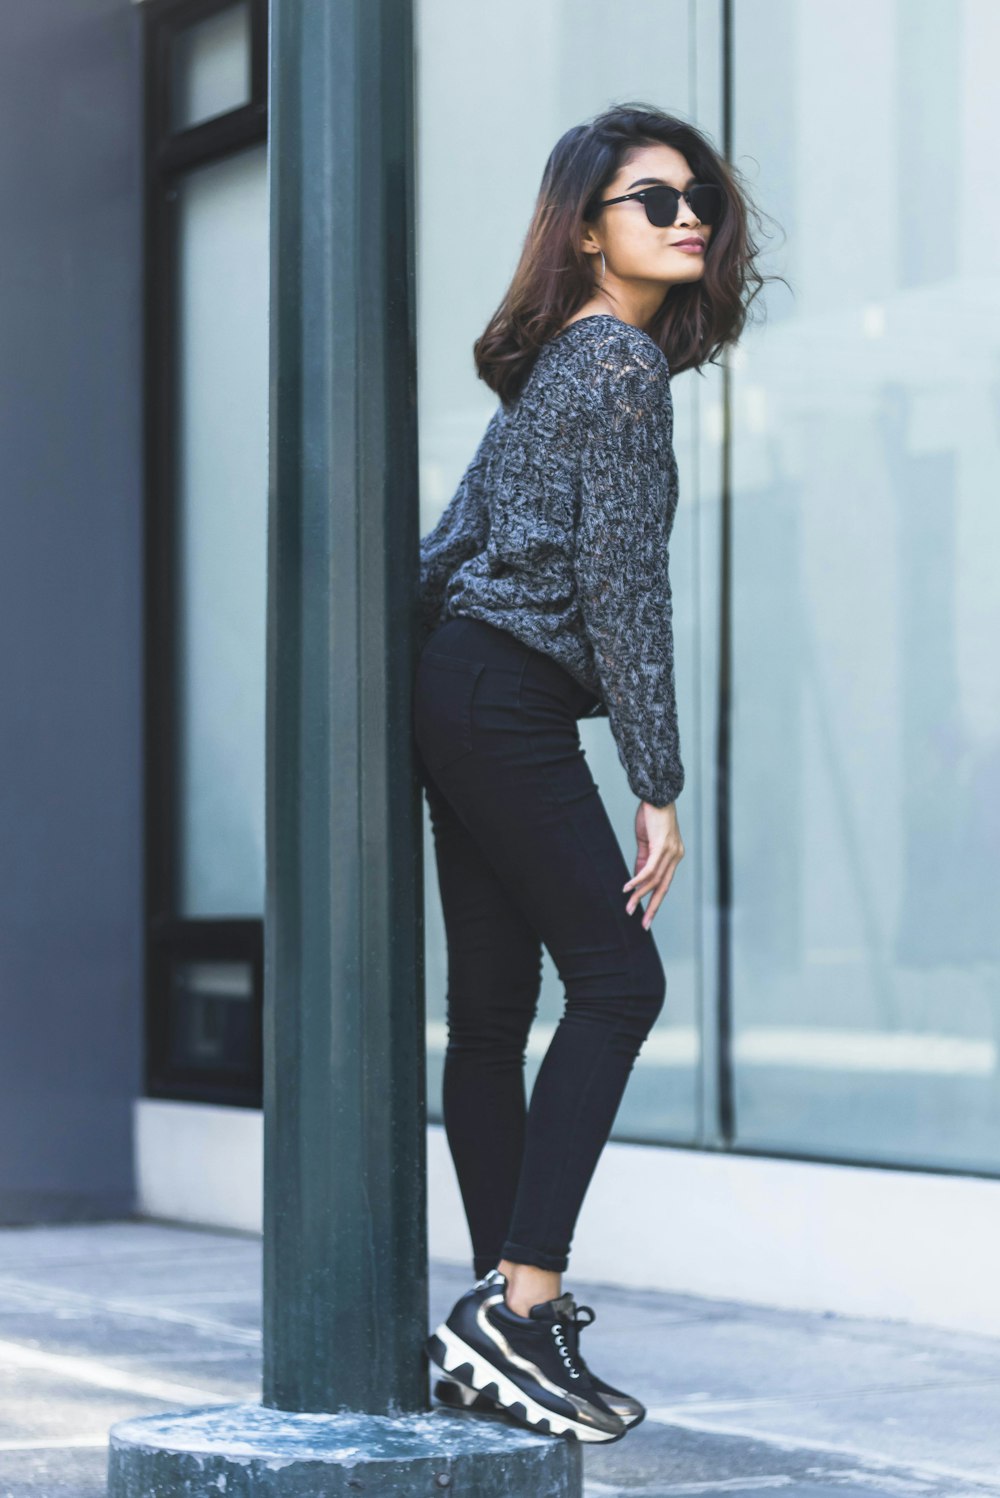 woman in gray long-sleeved top and black pants leaning butt on post